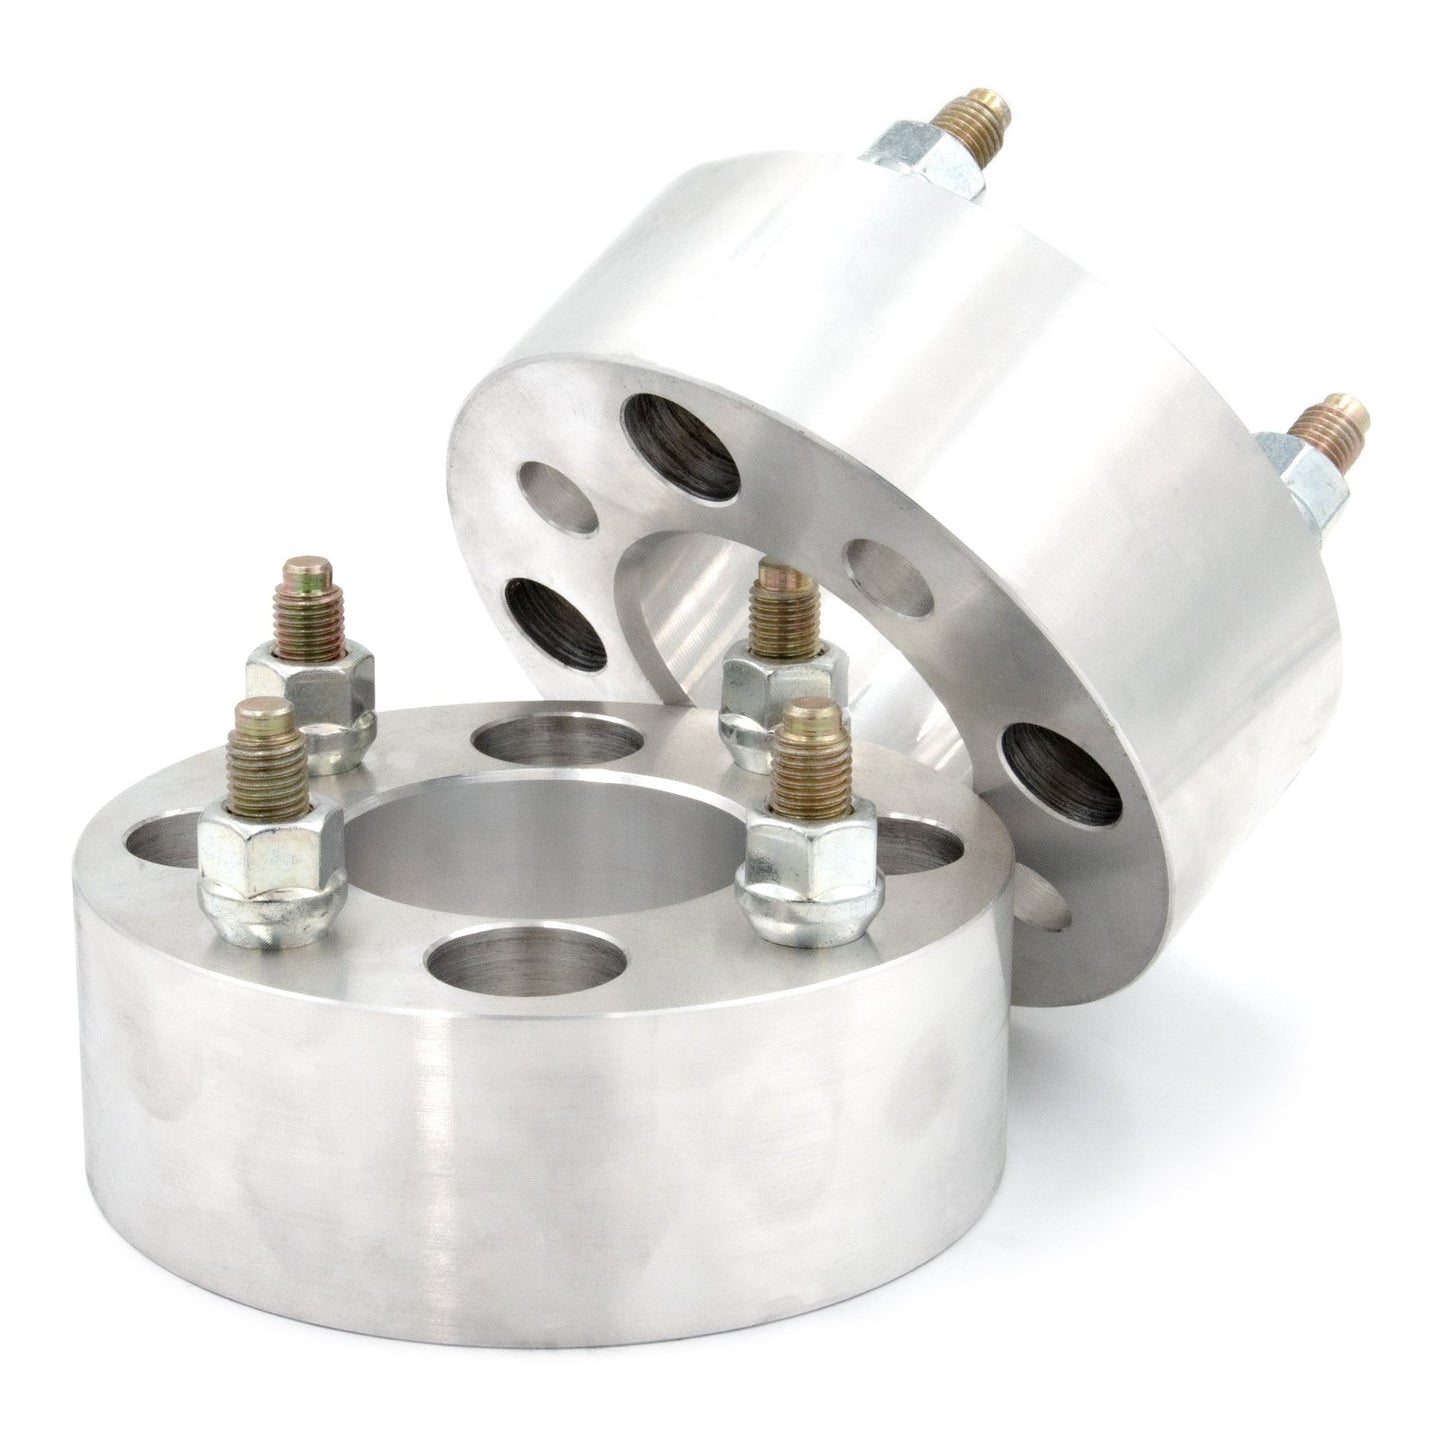 4x120 to 4x100 Wheel Spacer/Adapter - Thickness: 3/4"- 4"